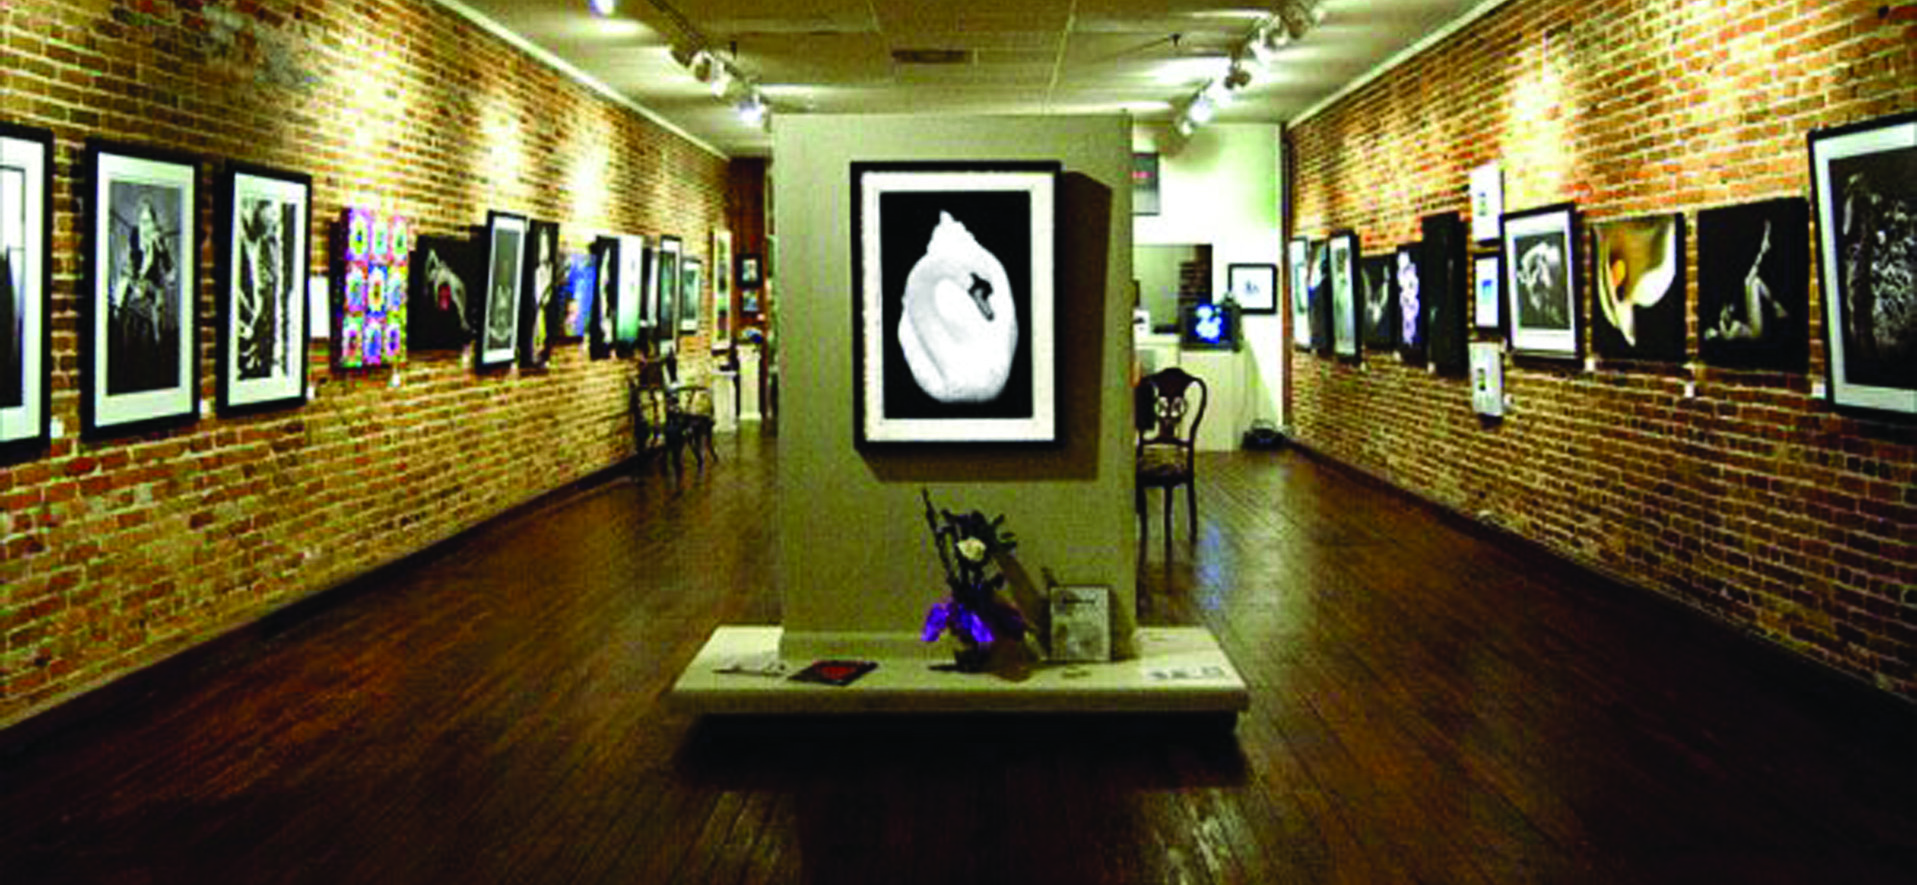 Arts For Act Gallery